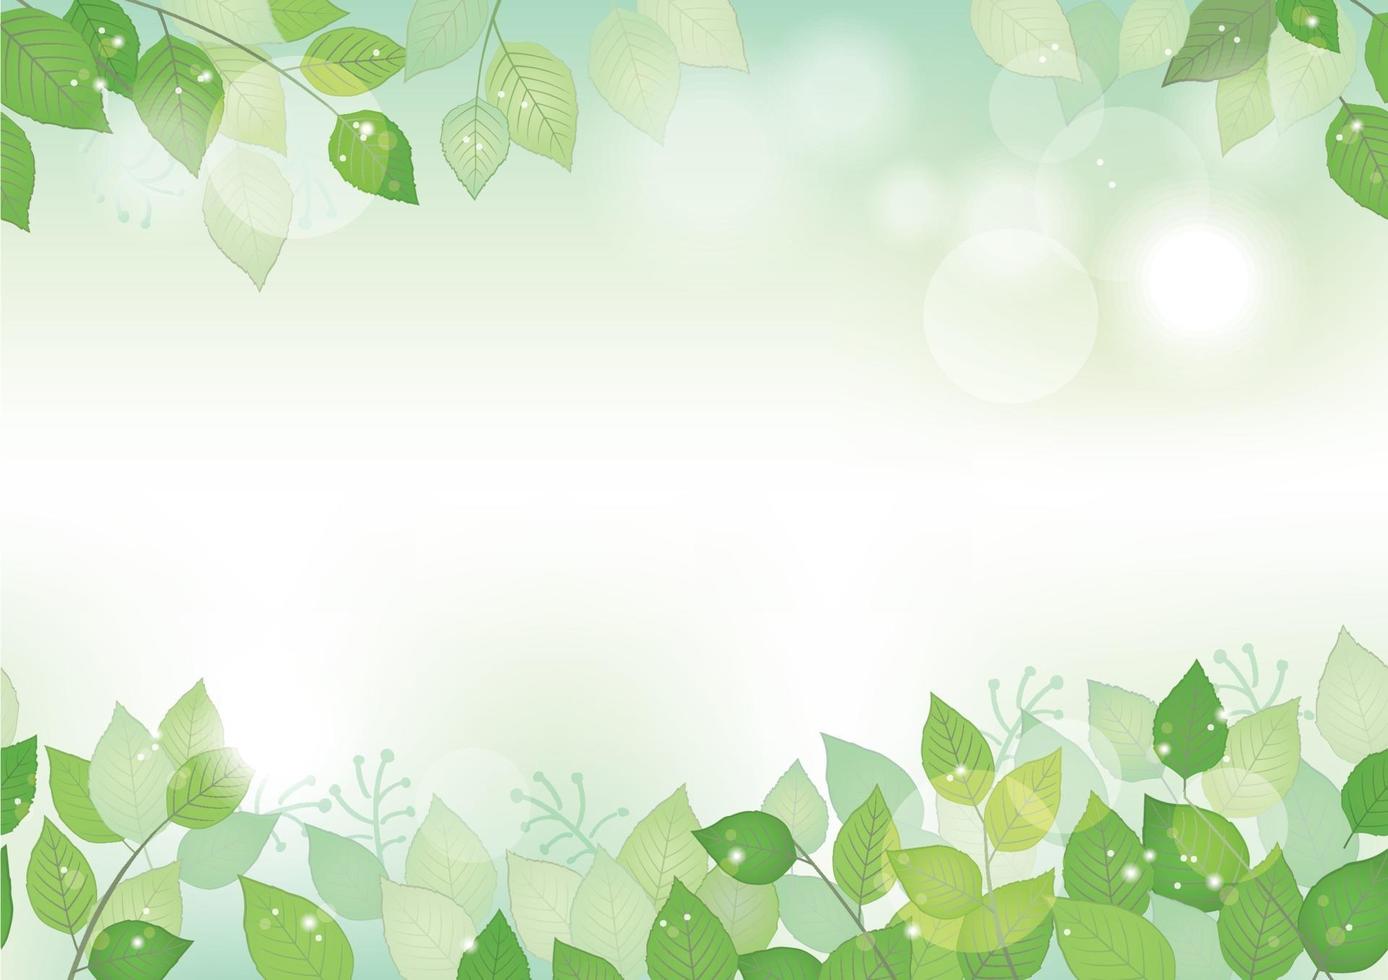 Seamless watercolor fresh green background with text space, vector illustration. Environmentally conscious image with plants and sunlight. Horizontally repeatable.